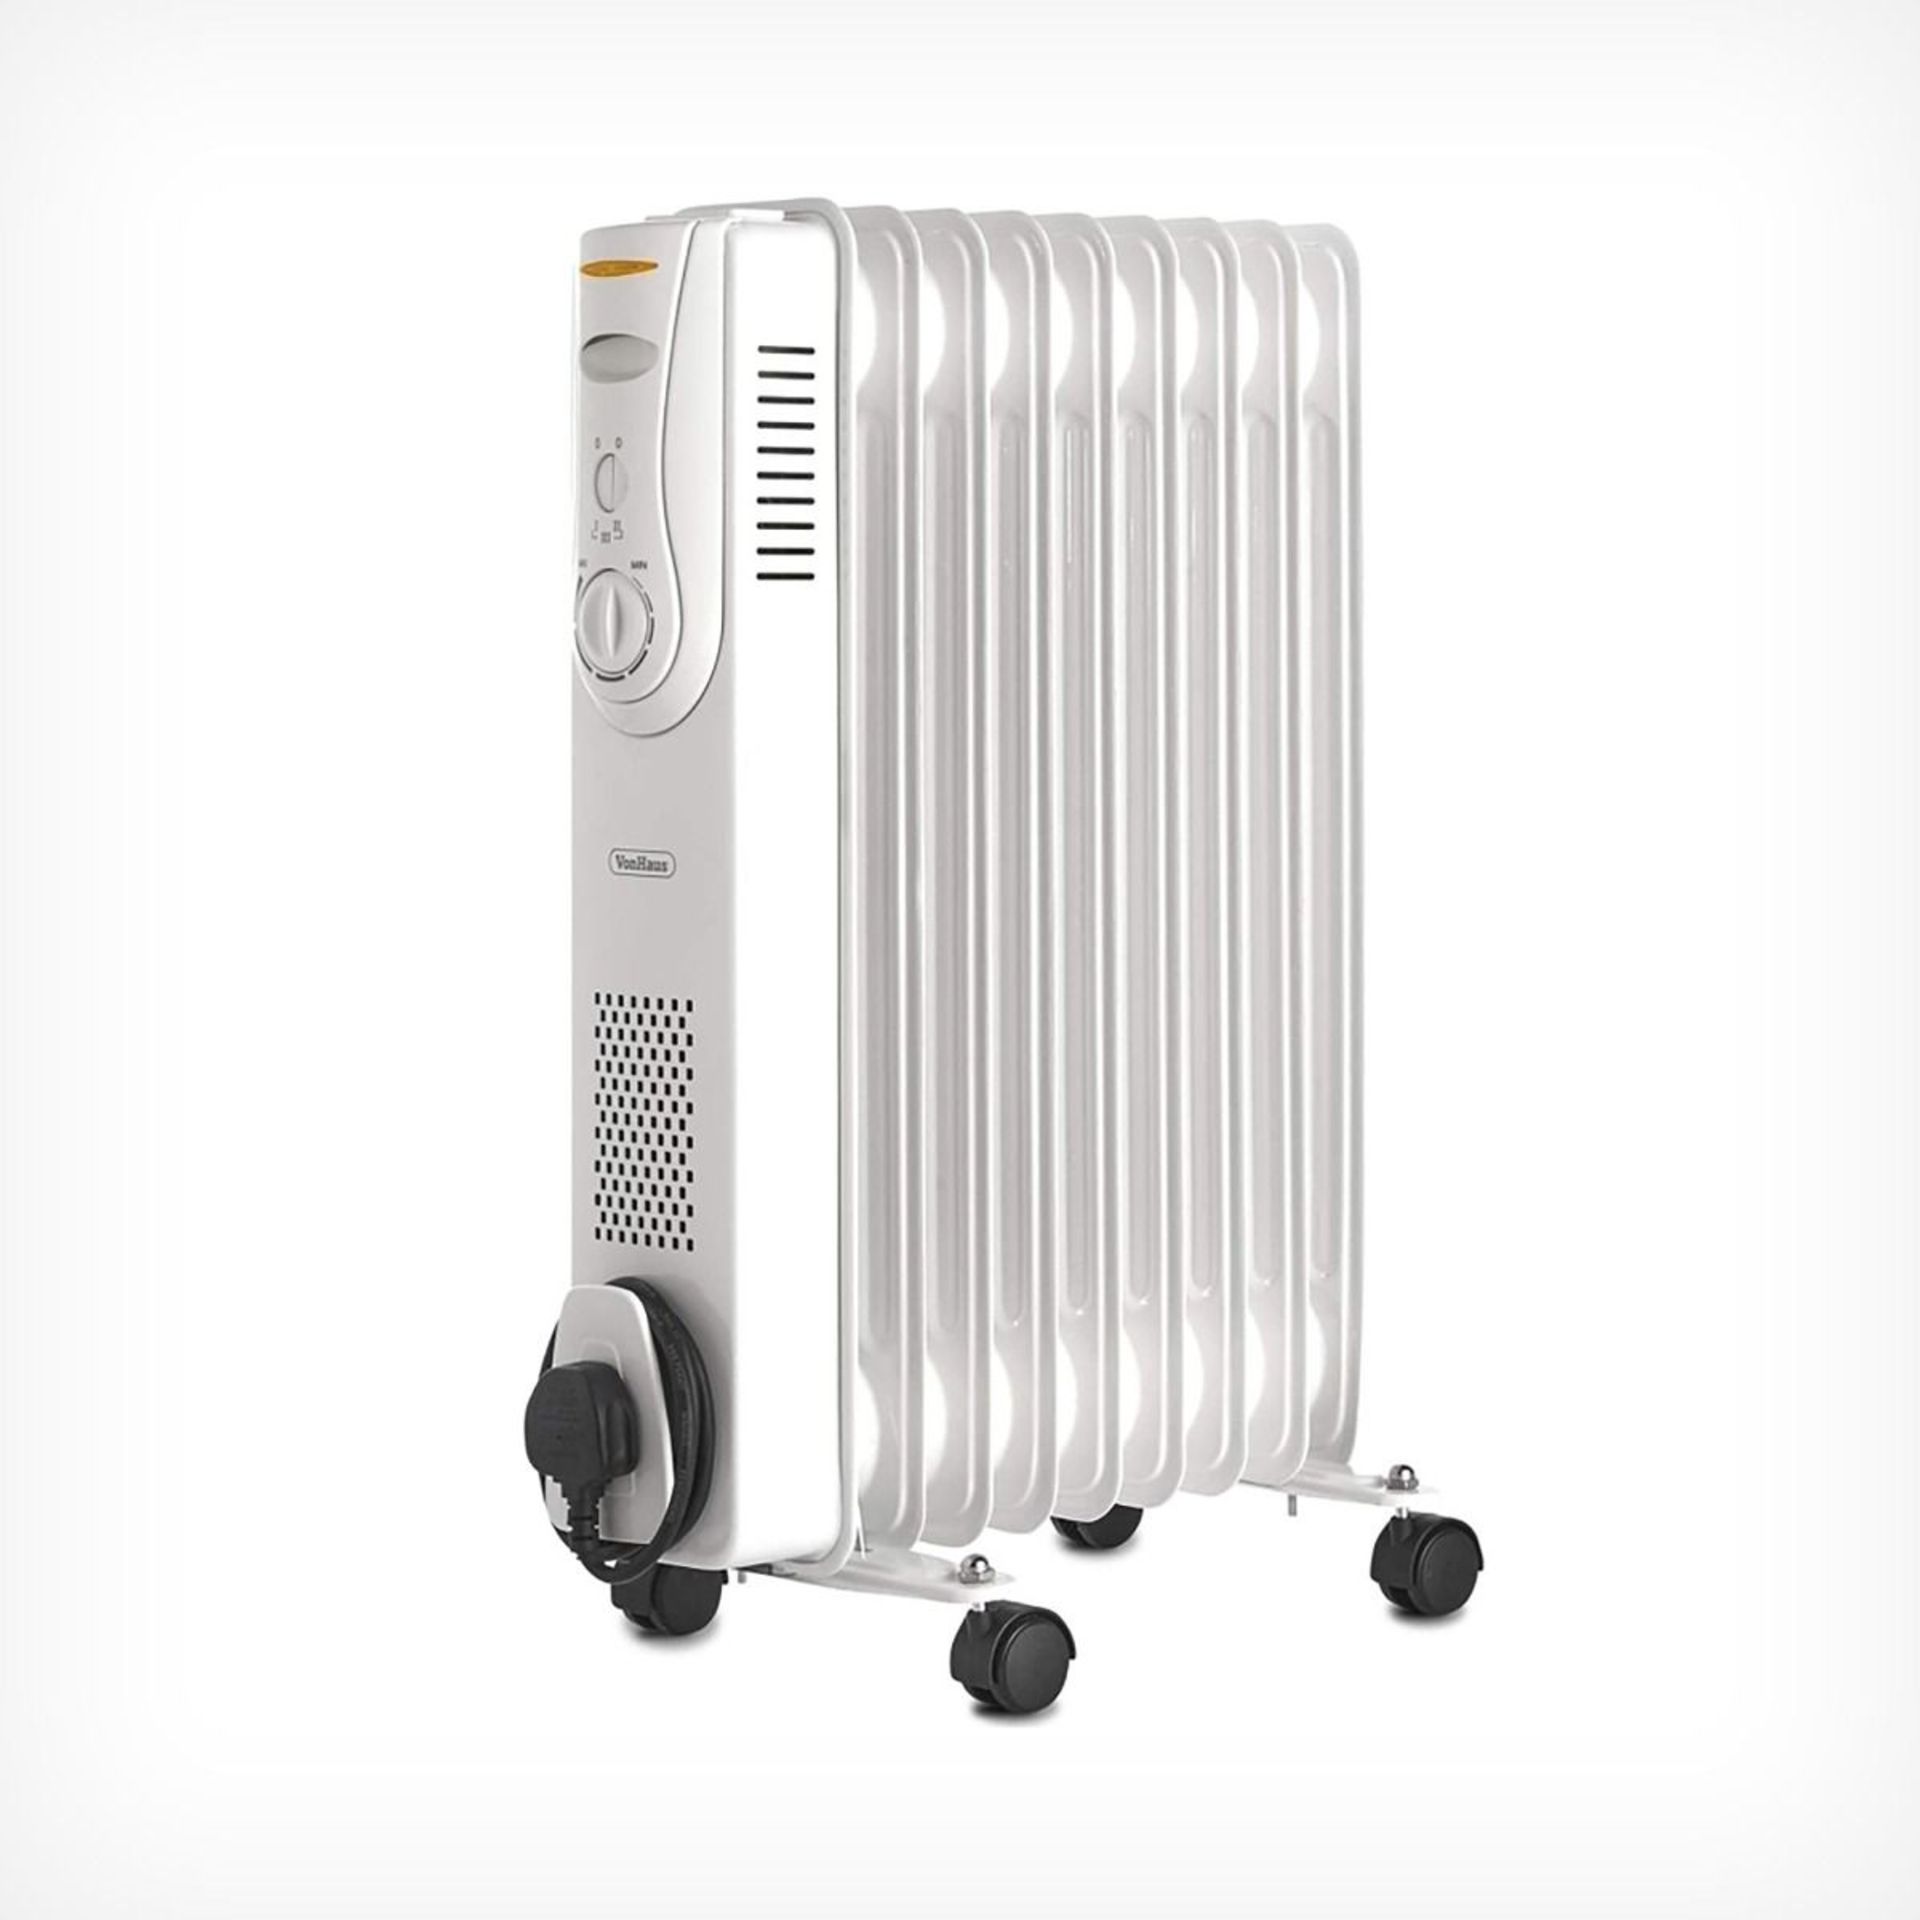 (H188) 9 Fin 2000W Oil Filled Radiator - White Powerful 2000W radiator with 9 oil-filled fins ... - Image 2 of 3